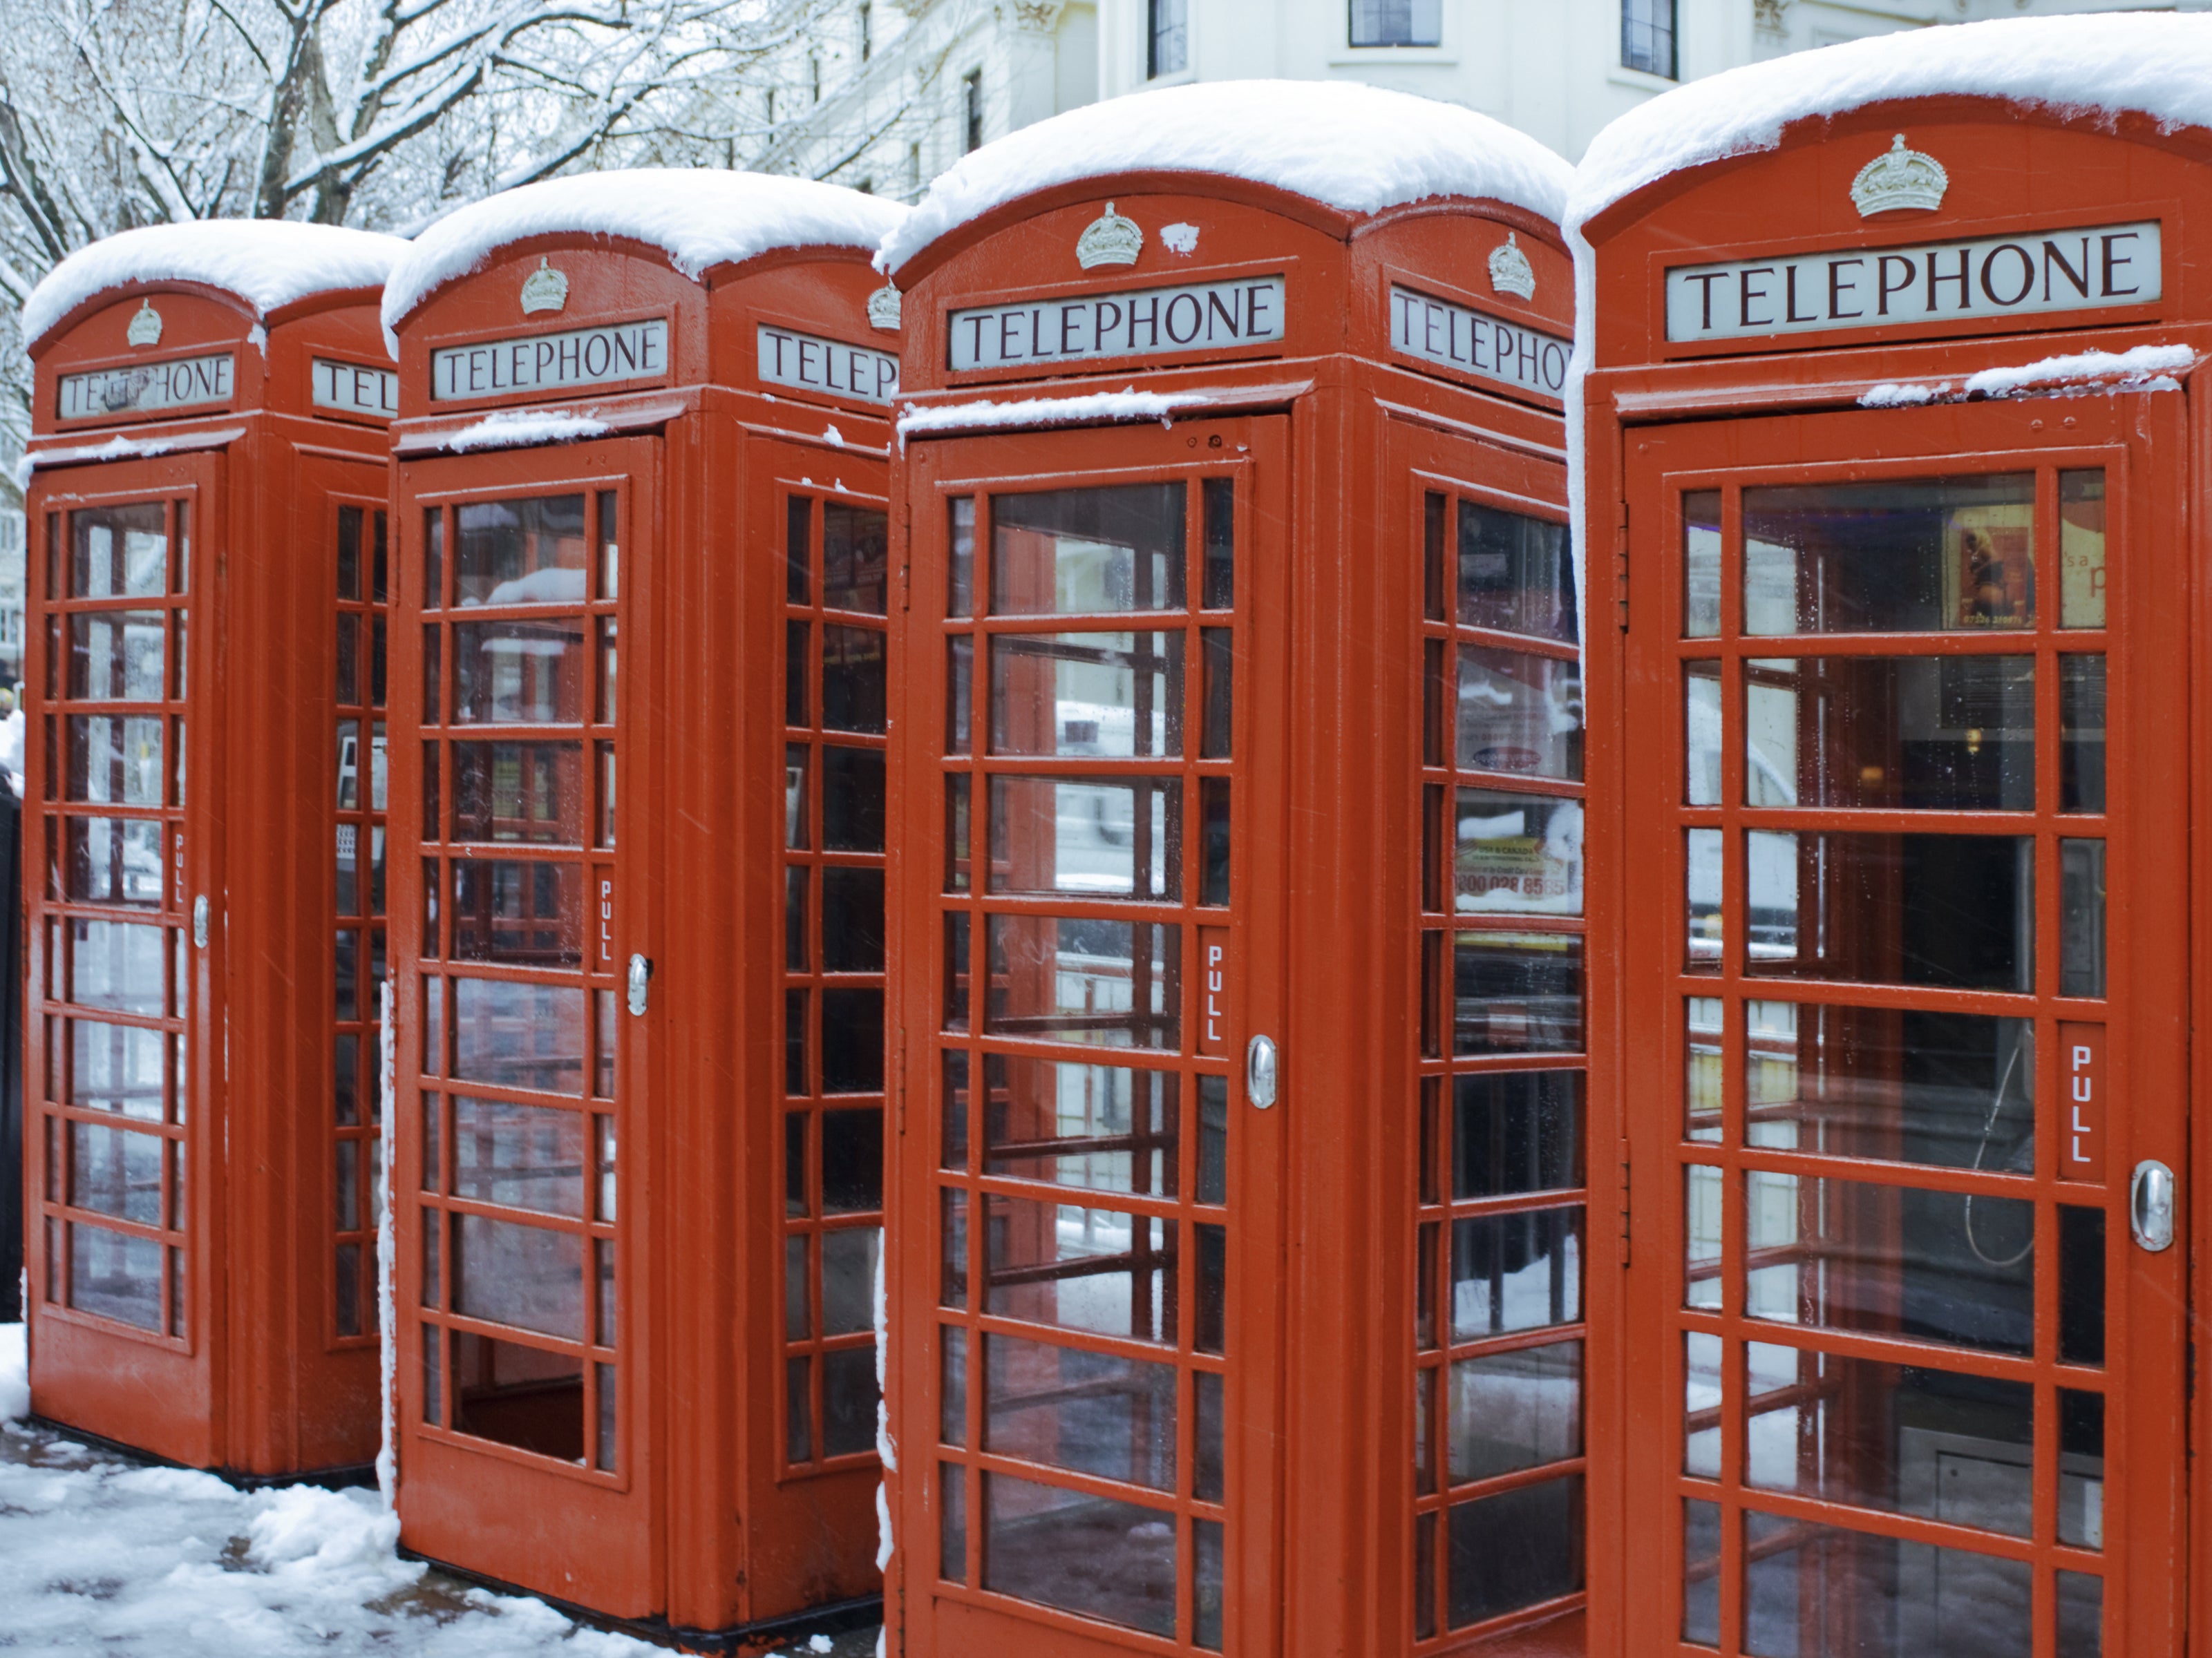 Snow lines red telephone boxes in central London